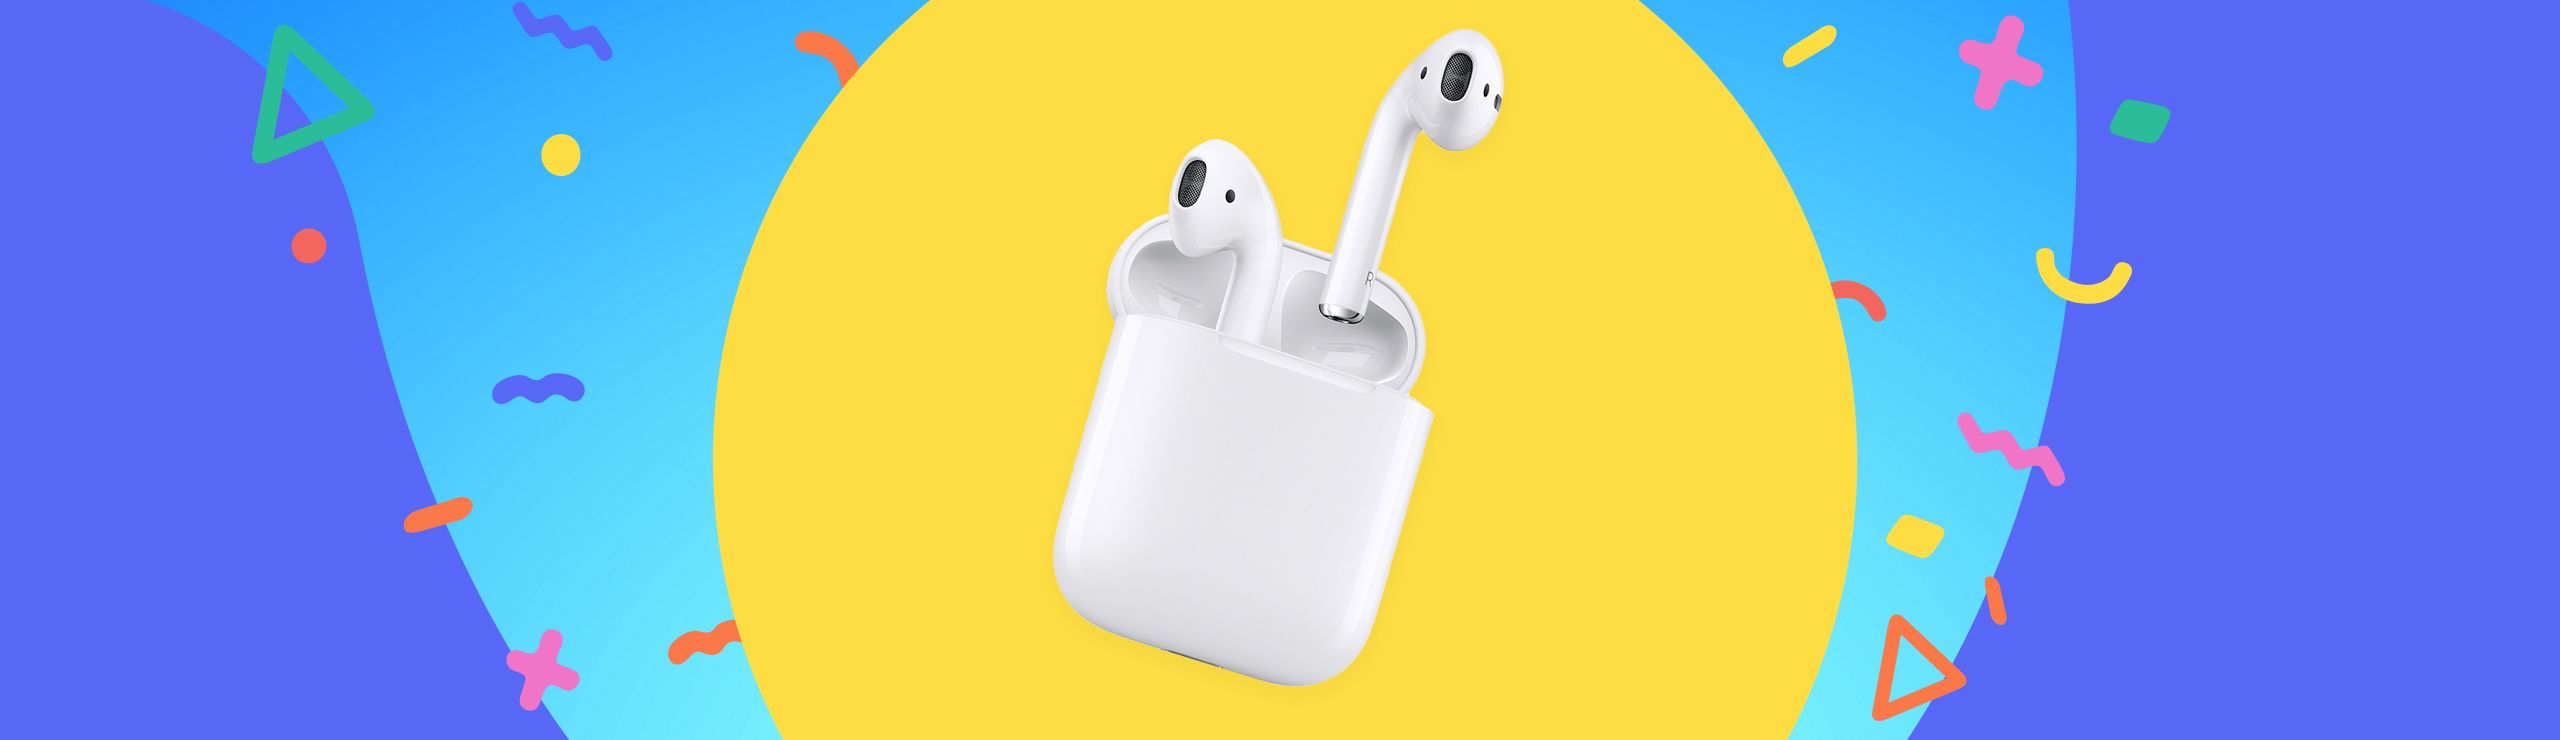 WIN APPLE AIRPODS 2